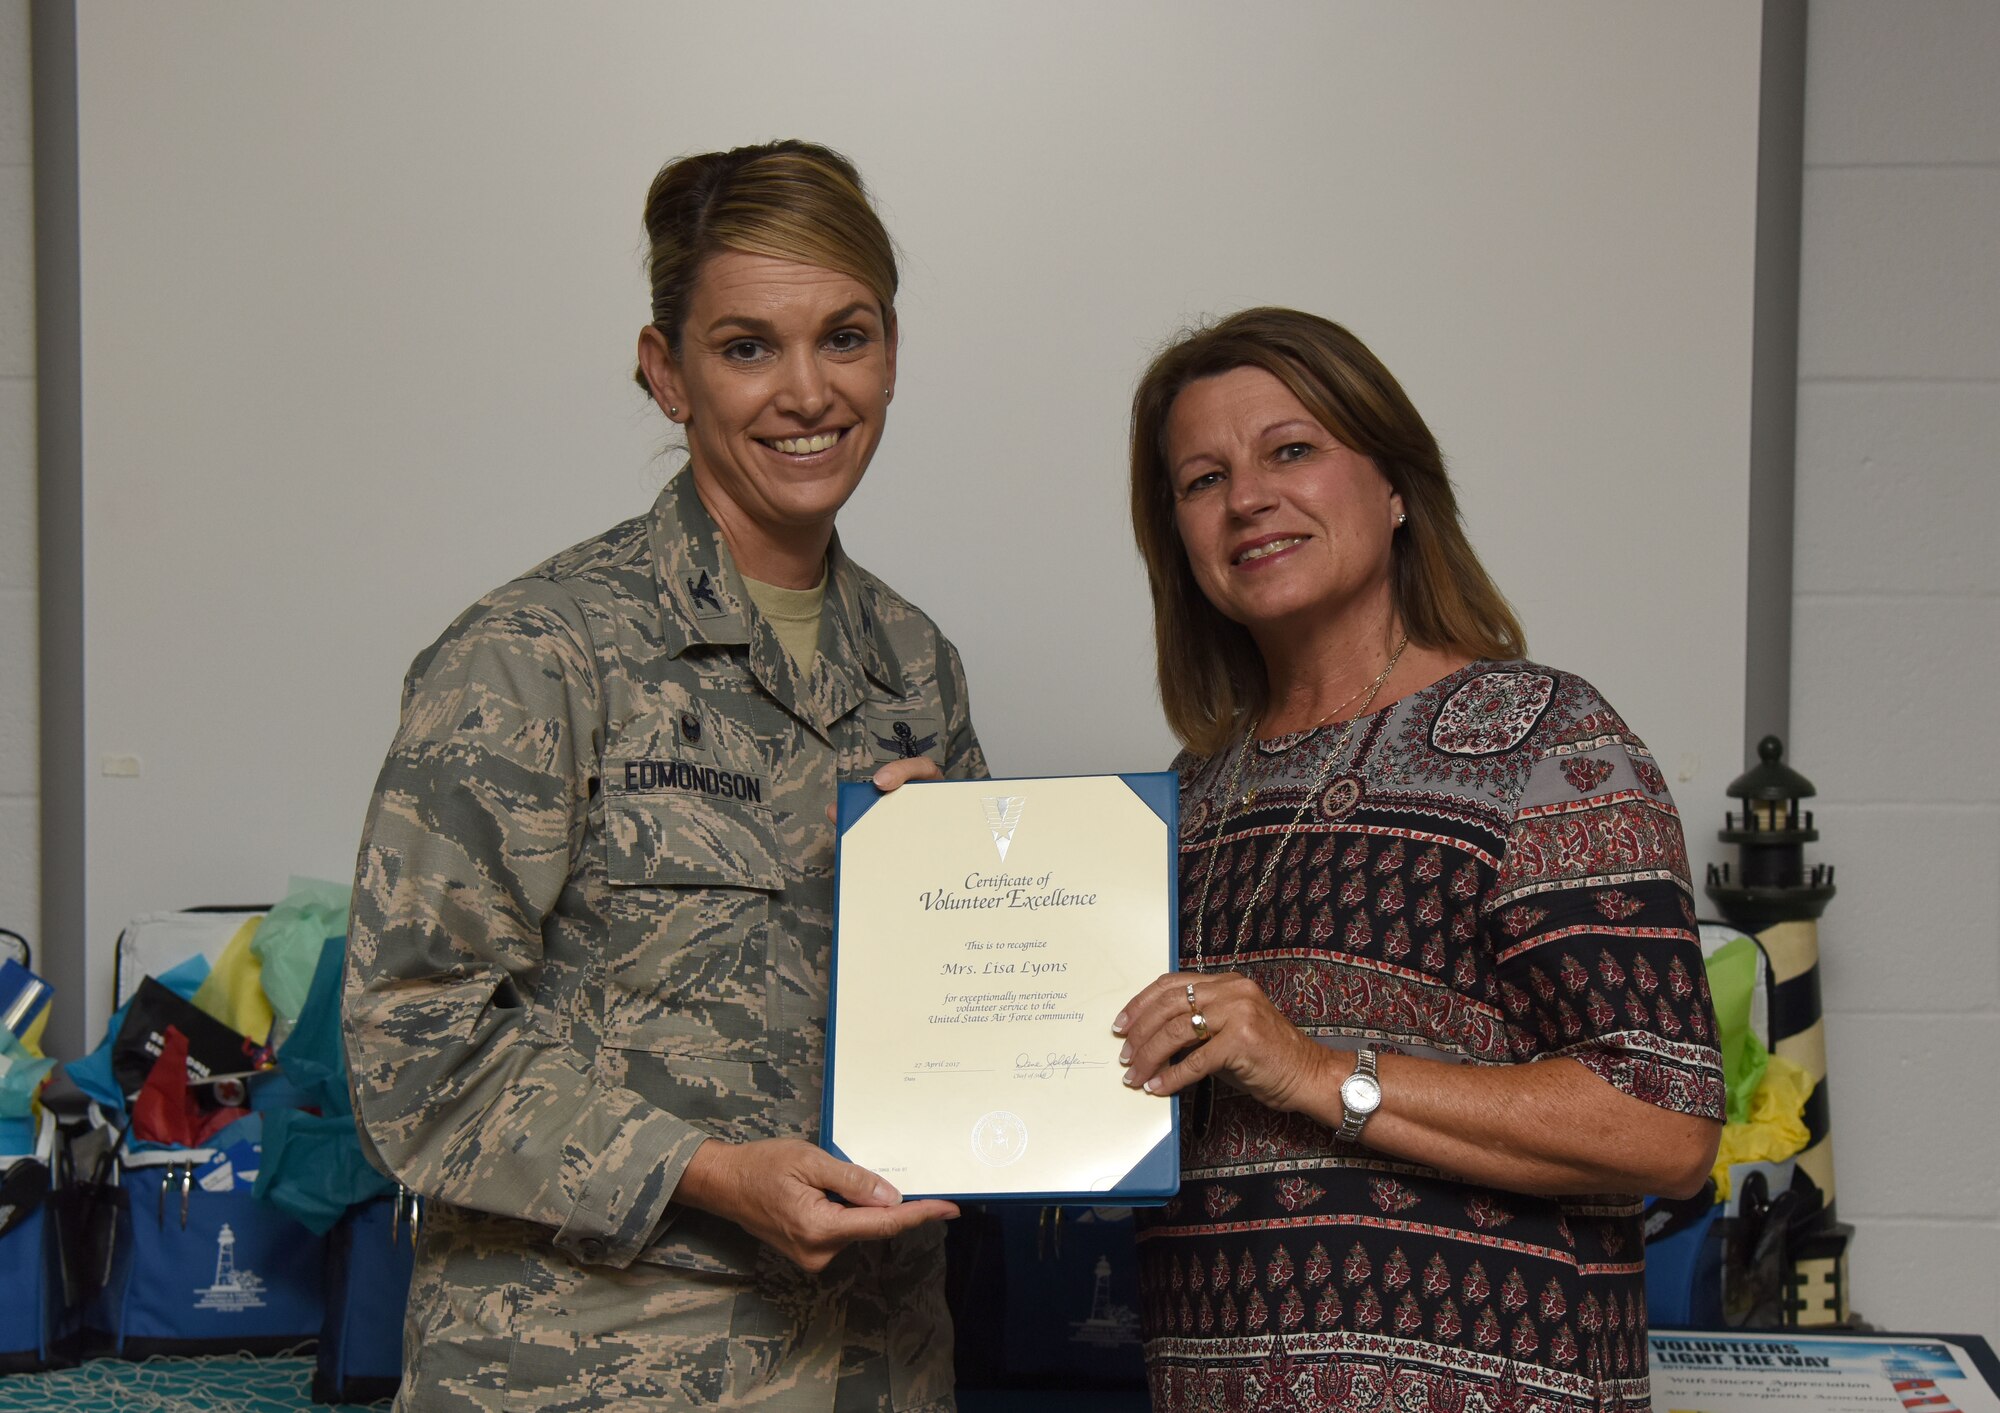 Col. Michele Edmondson, 81st Training Wing commander, presents Lisa Lyons, 81st Force Support Squadron community readiness specialist, with a Volunteer Excellence Award during the Annual Volunteer Recognition Ceremony in the Sablich Center April 27, 2017, on Keesler Air Force Base, Miss. The Volunteer Excellence Award is a lifetime achievement award recognizing volunteerism of a sustained and direct nature. The event recognized Keesler personnel, family member and retiree volunteers for their volunteer service in 2016. (U.S. Air Force photo by Kemberly Groue)